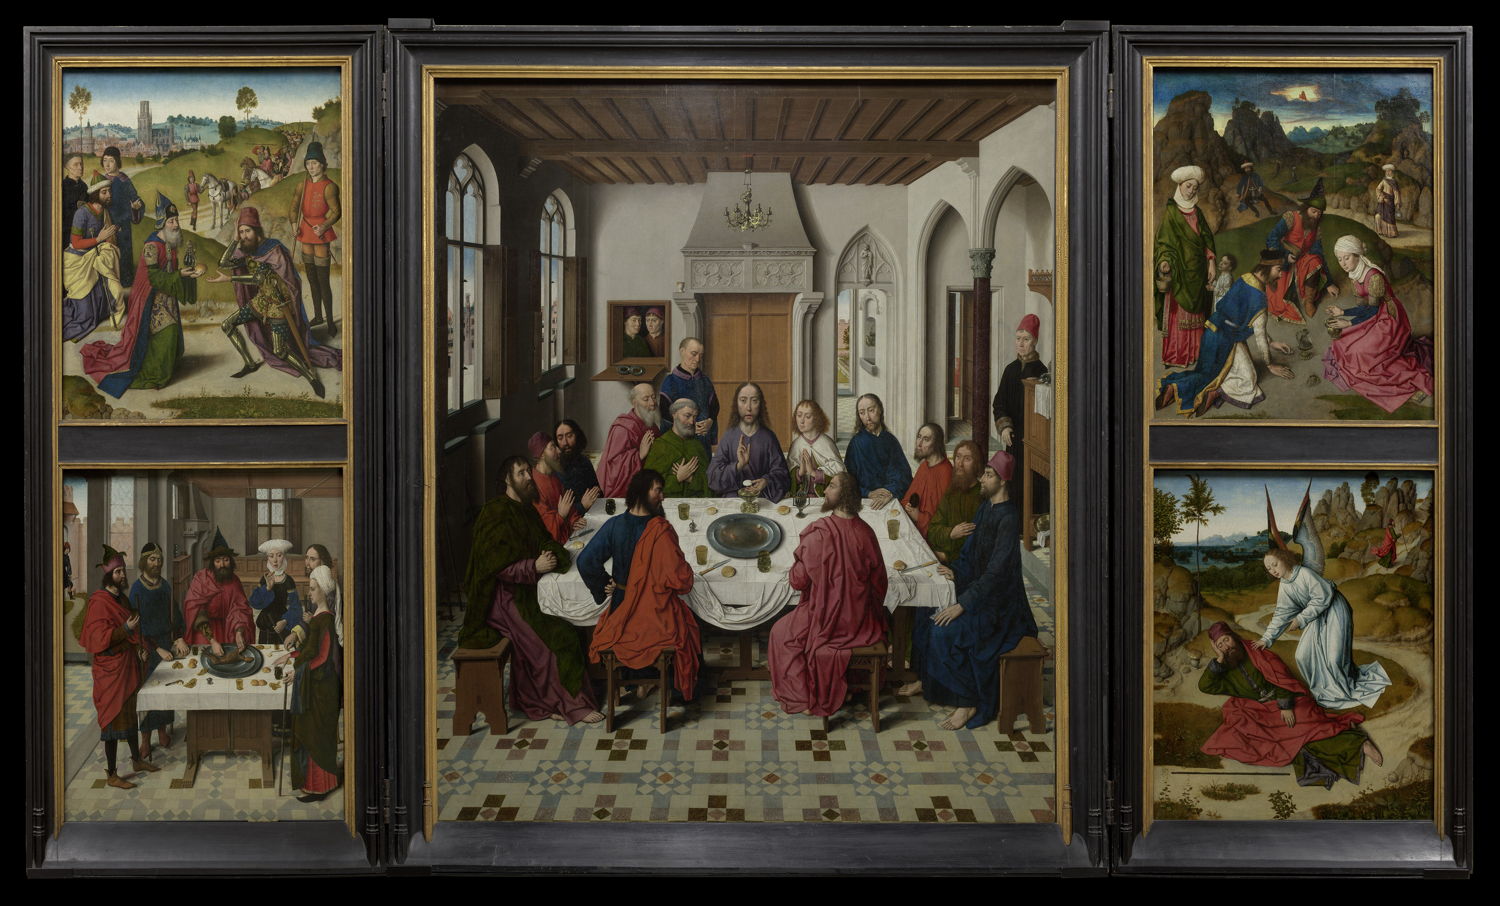 Triptych with the Last Supper (c) www.lukasweb.be - Art in Flanders vzw, foto: Dominique Provost